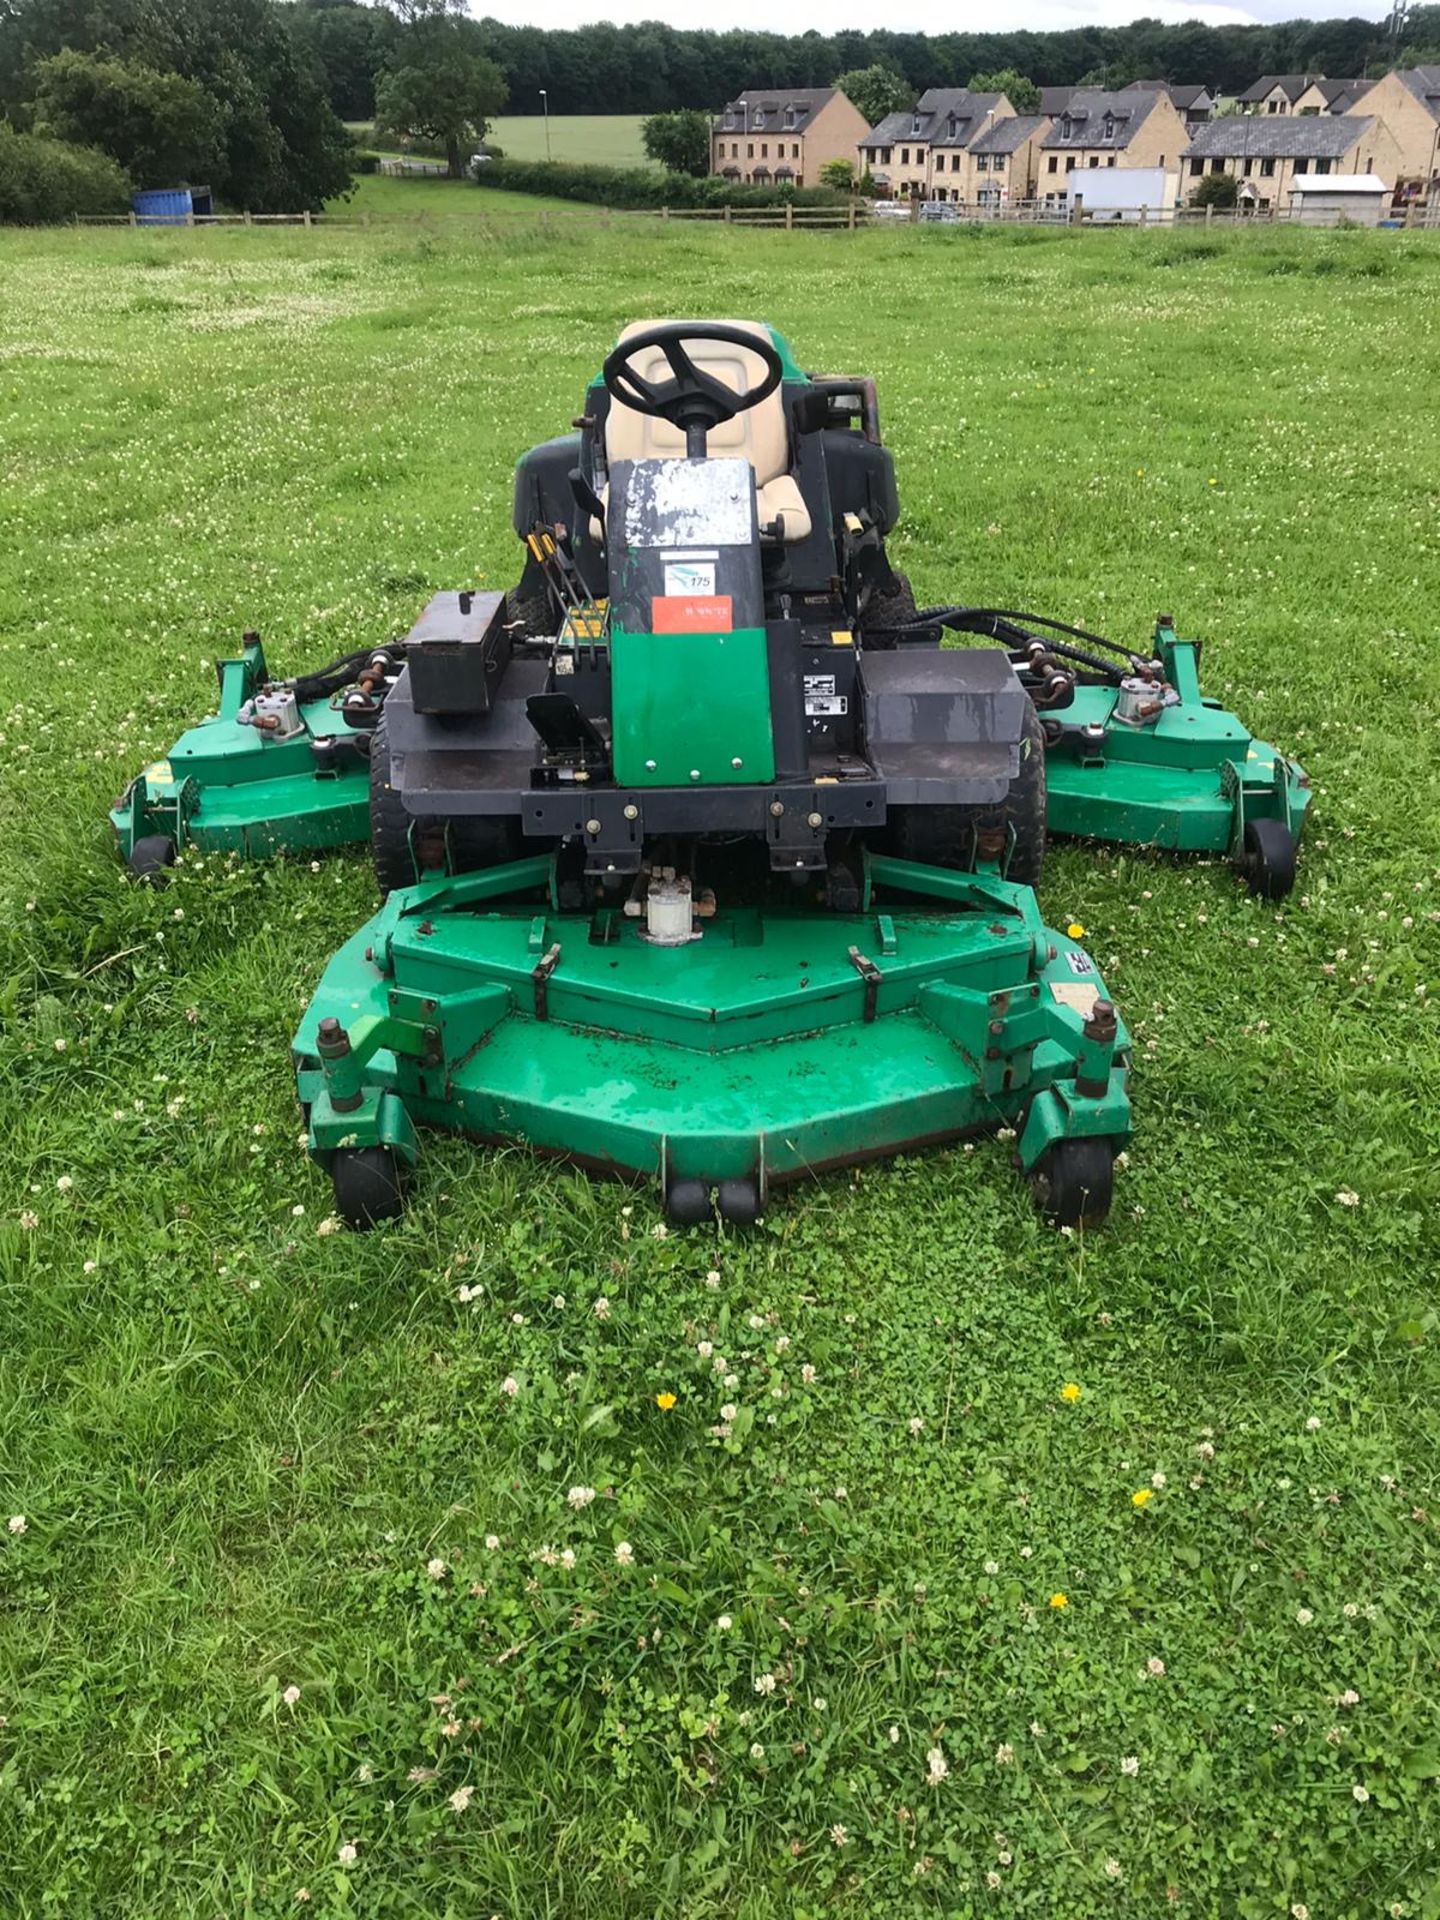 RANSOMES HR6010 BATWING RIDE ON LAWN MOWER, YEAR 2007, ONLY DONE 3431 HOURS *NO VAT* - Image 4 of 13